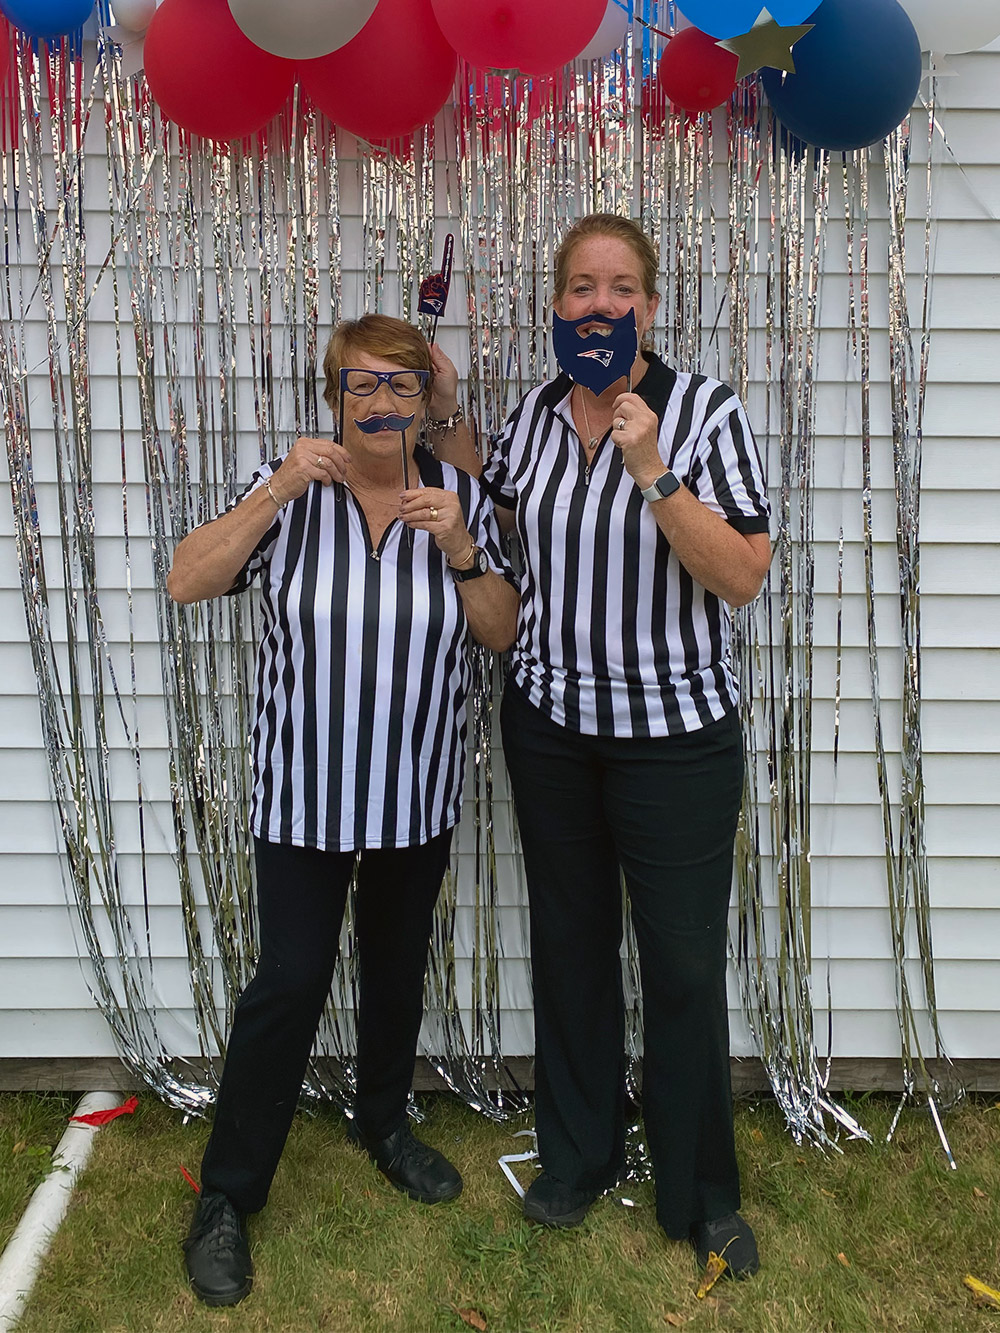 Simply Serving Team Wearing Referee Uniforms for an Event